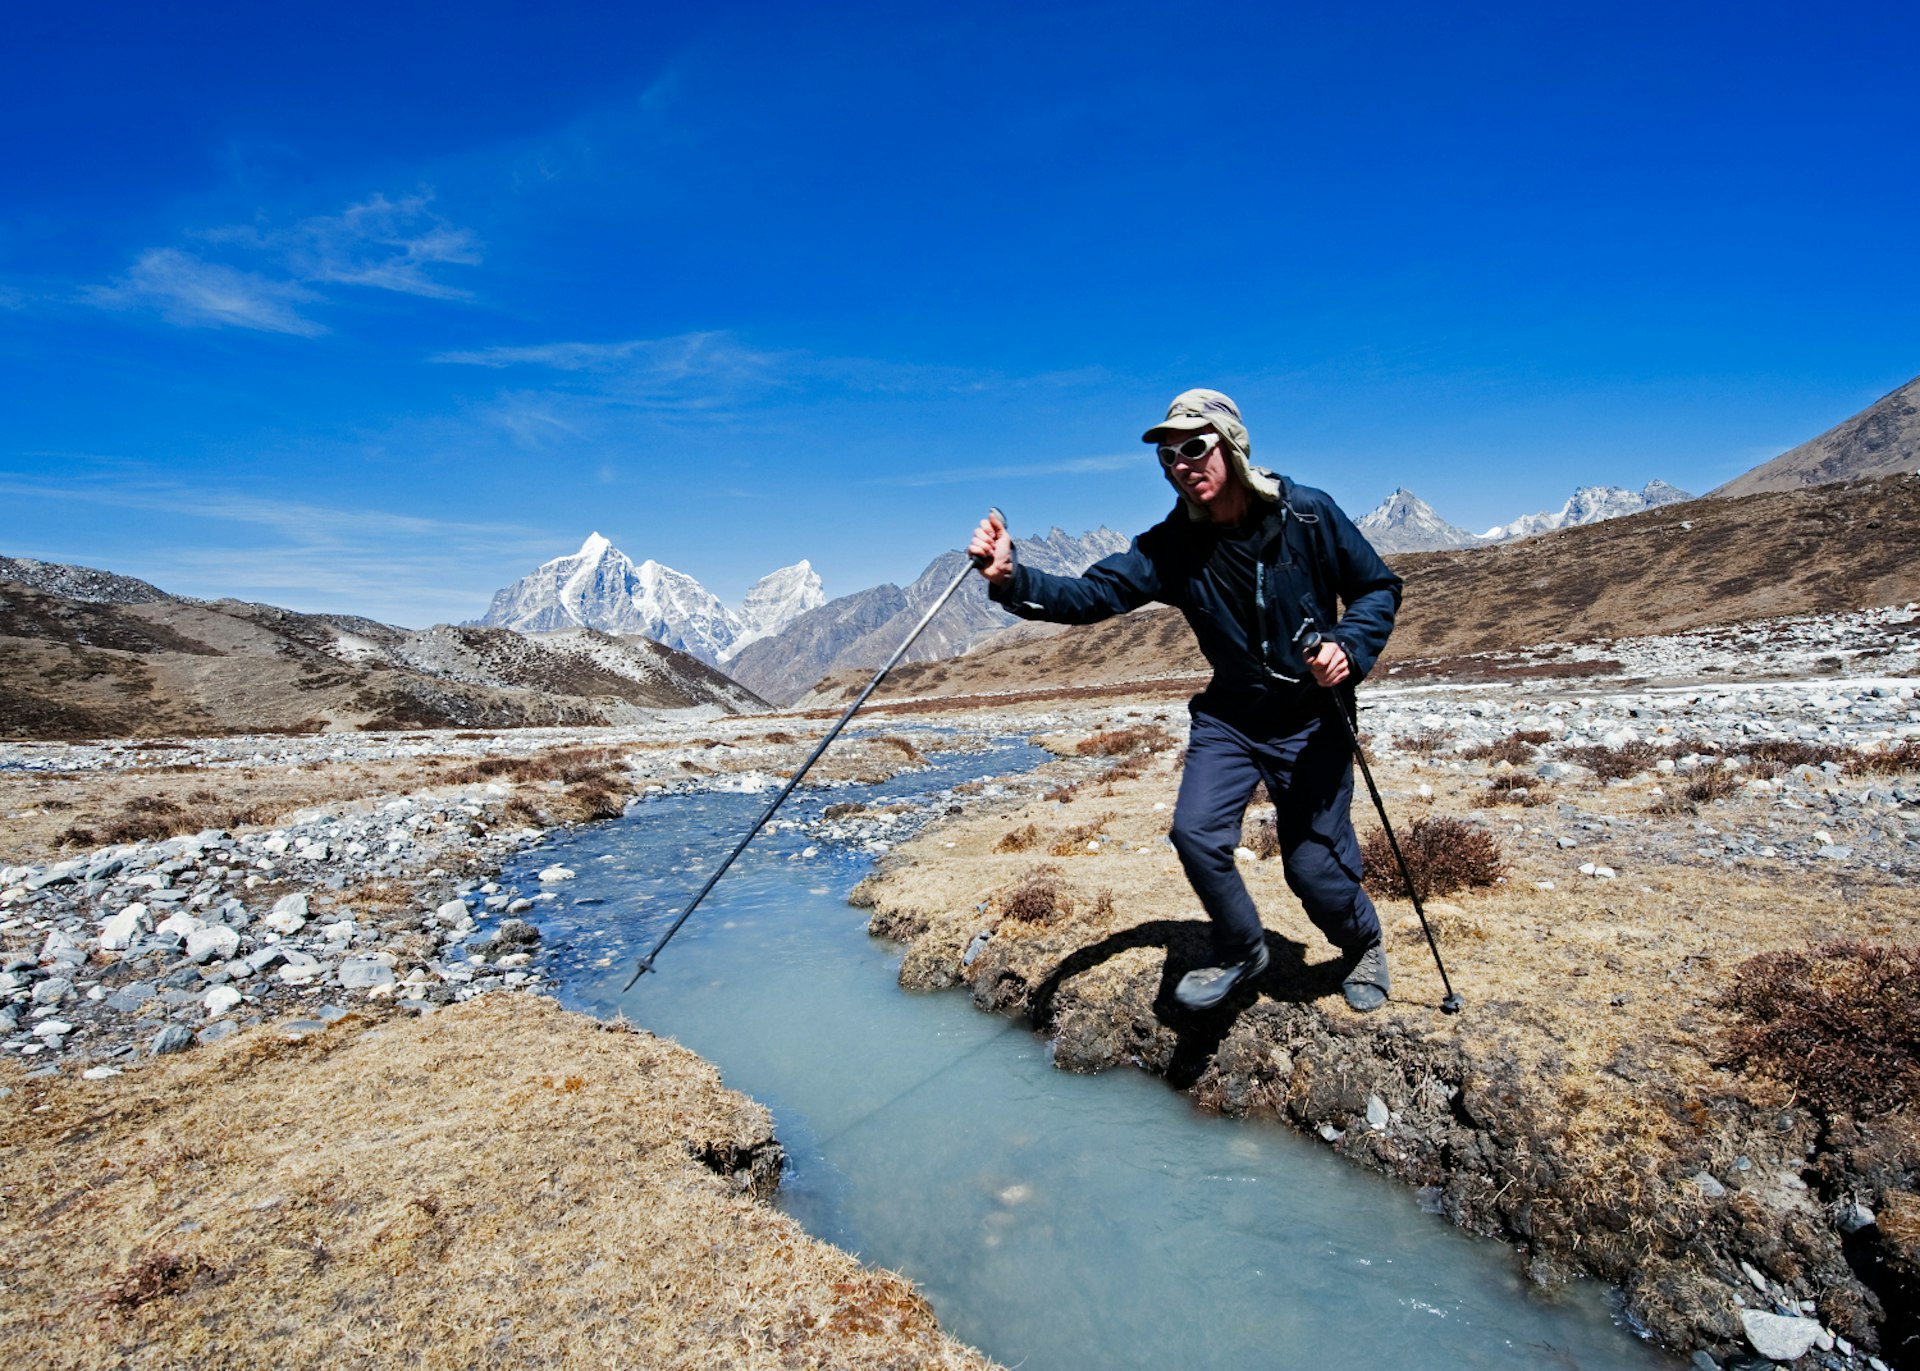 Crossing a stream in the Chukkung Valley. Image by Christian Kober / Getty Images.